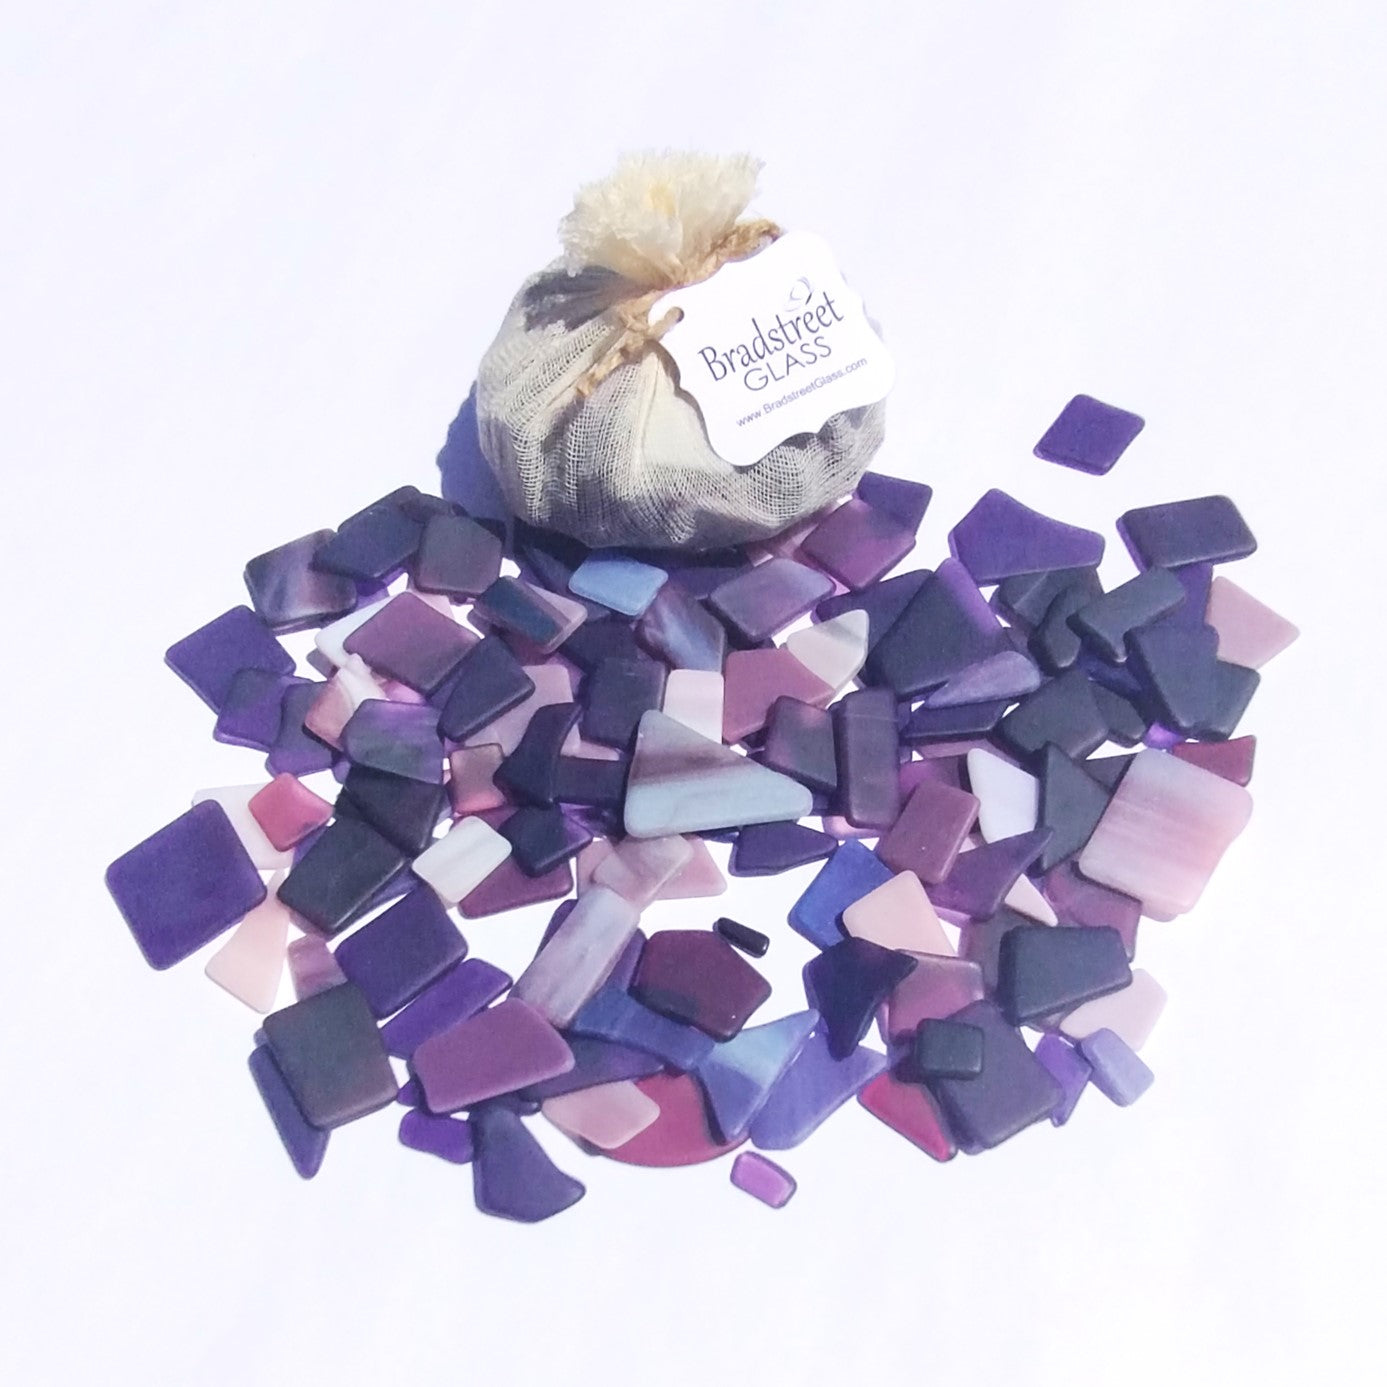 Bradstreet Glass Purple Tumbled Stained Glass 1/2 pound "Sea Glass" in Shades of Purple